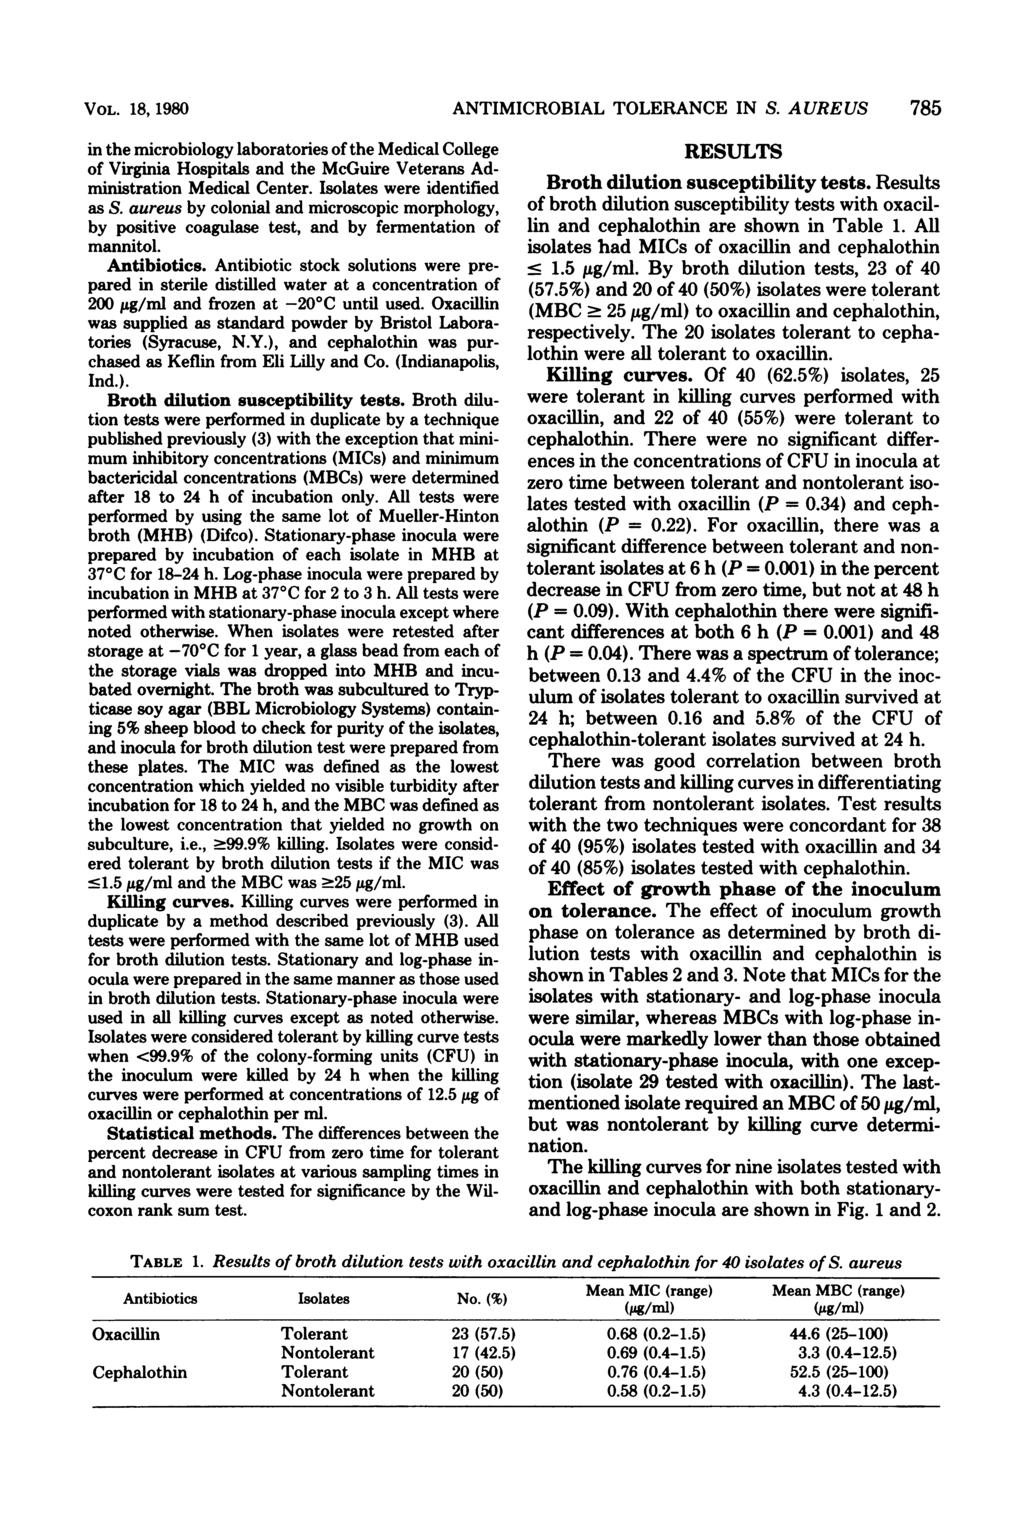 VOL. 18, 1980 in the microbiology laboratories of the Medical College of Virginia Hospitals and the McGuire Veterans Administration Medical Center. Isolates were identified as S.